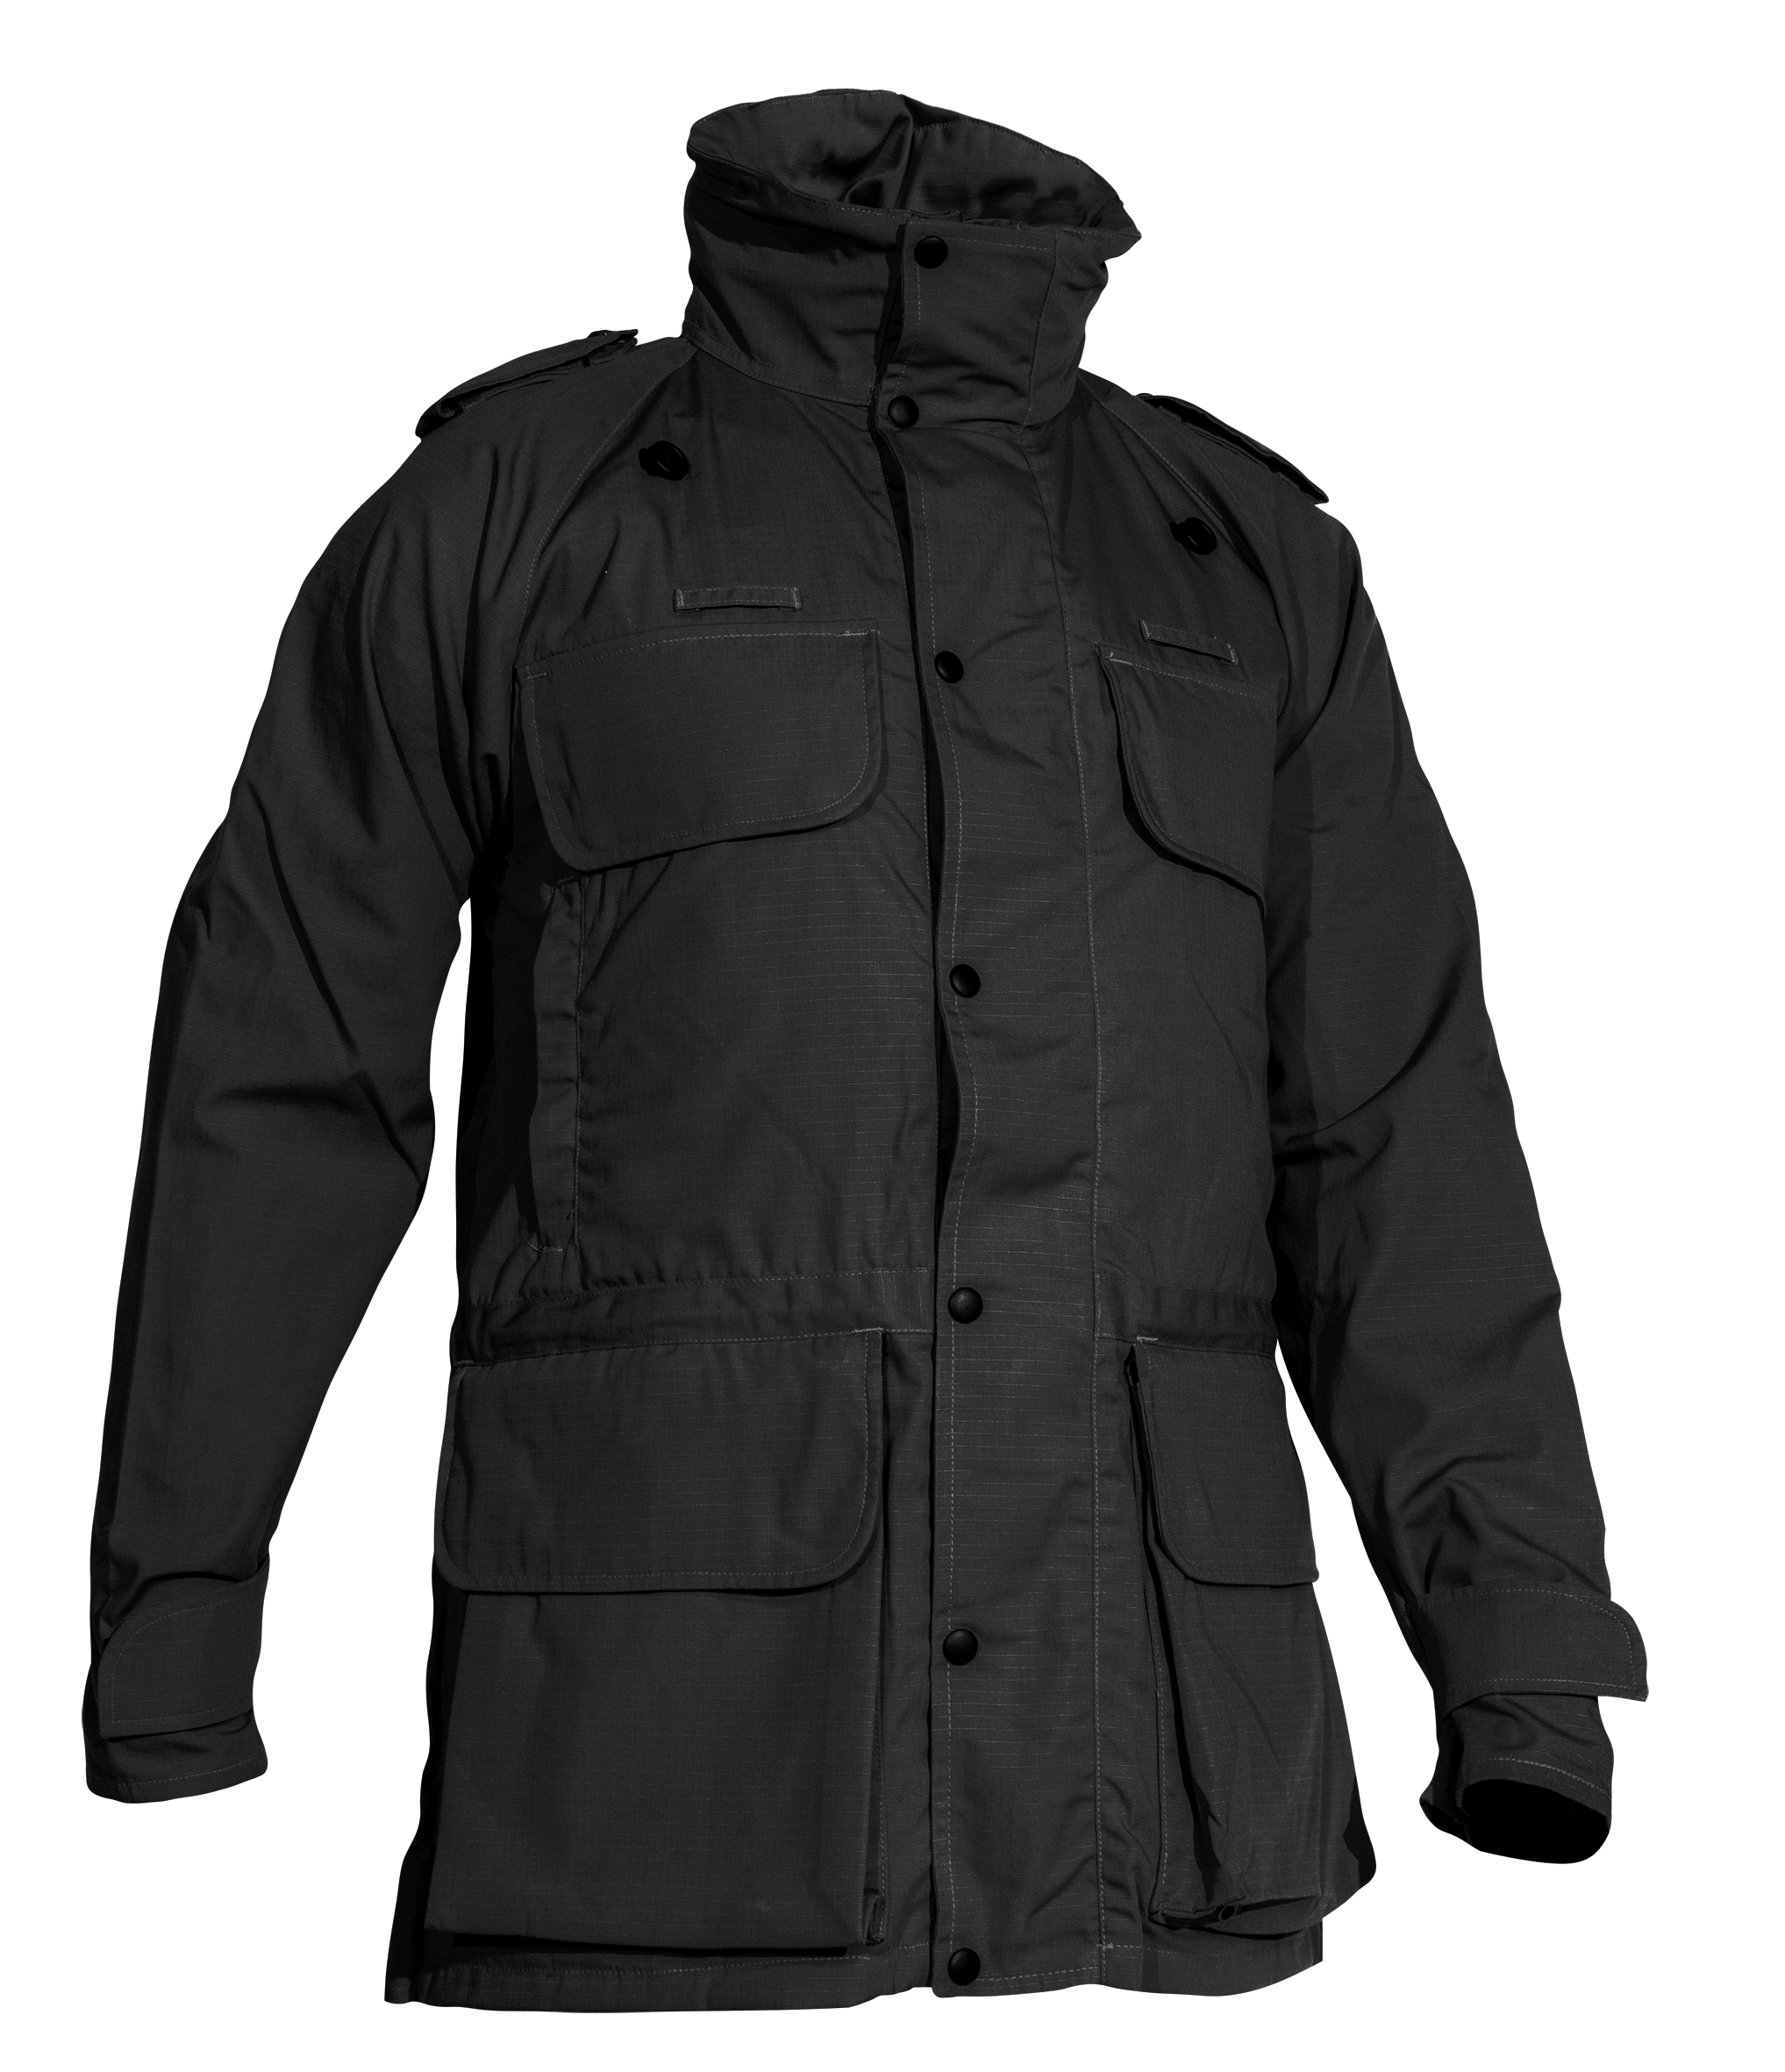 Arctic Avenger 3in1 Mission Jacket | Recon Company